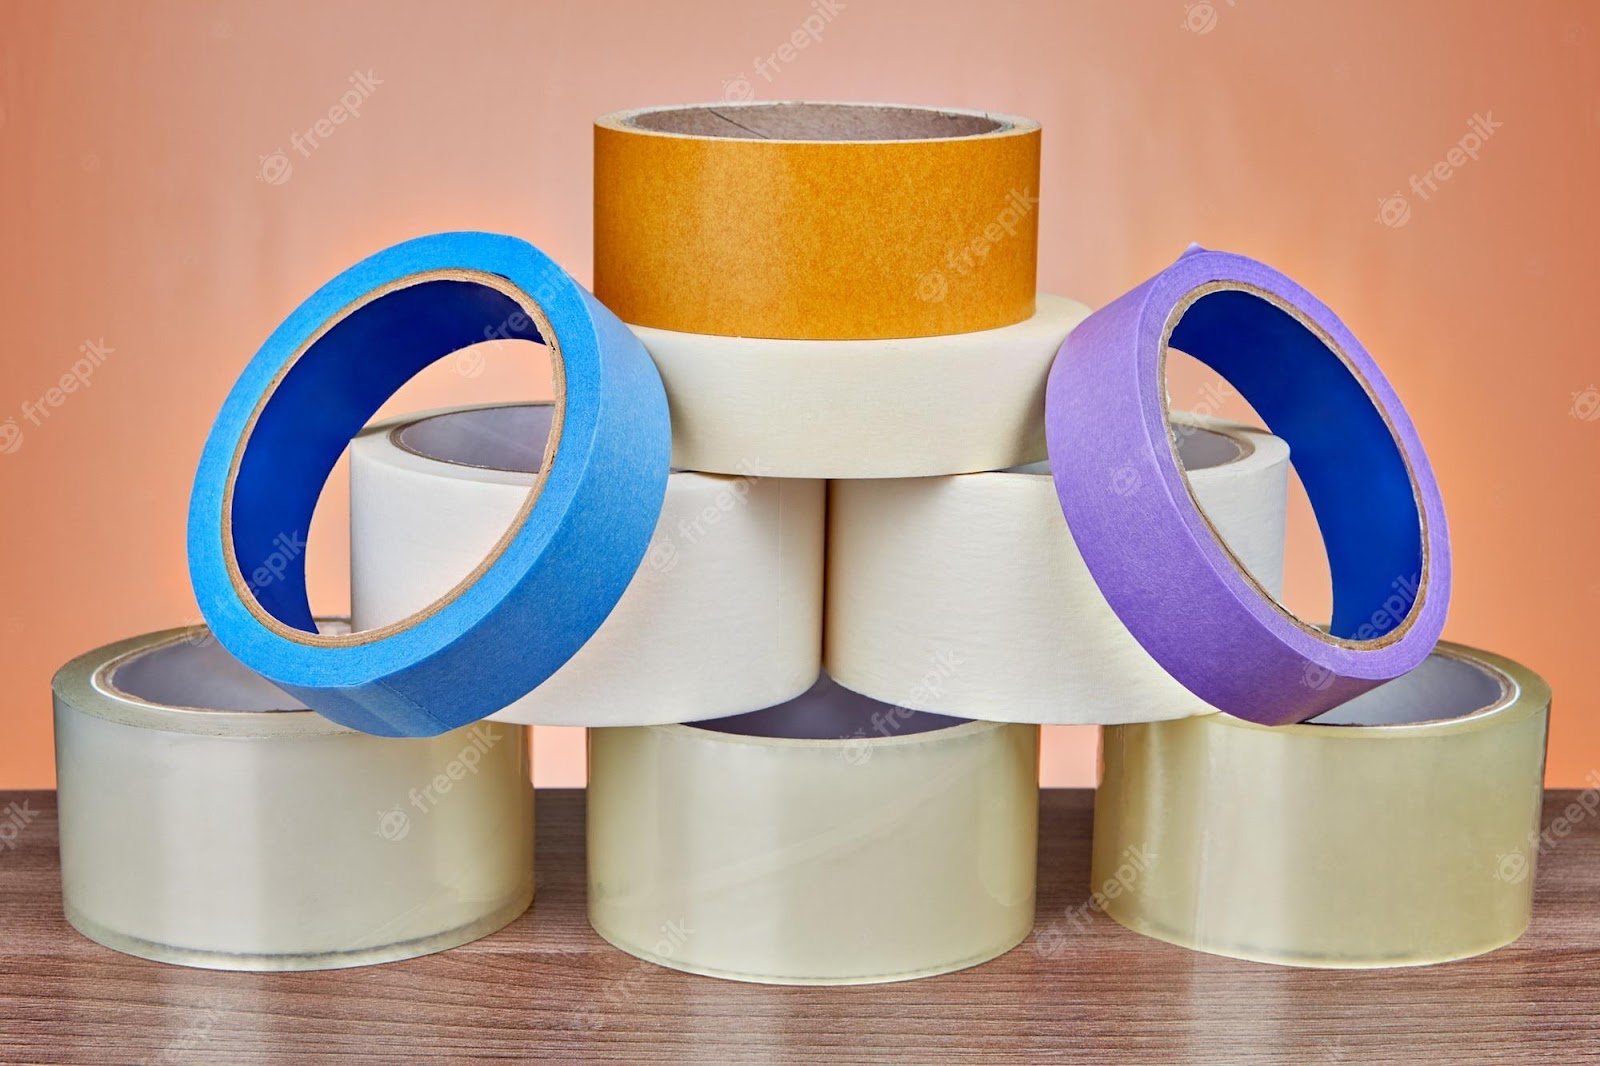 Clear BOPP Stationery Tape